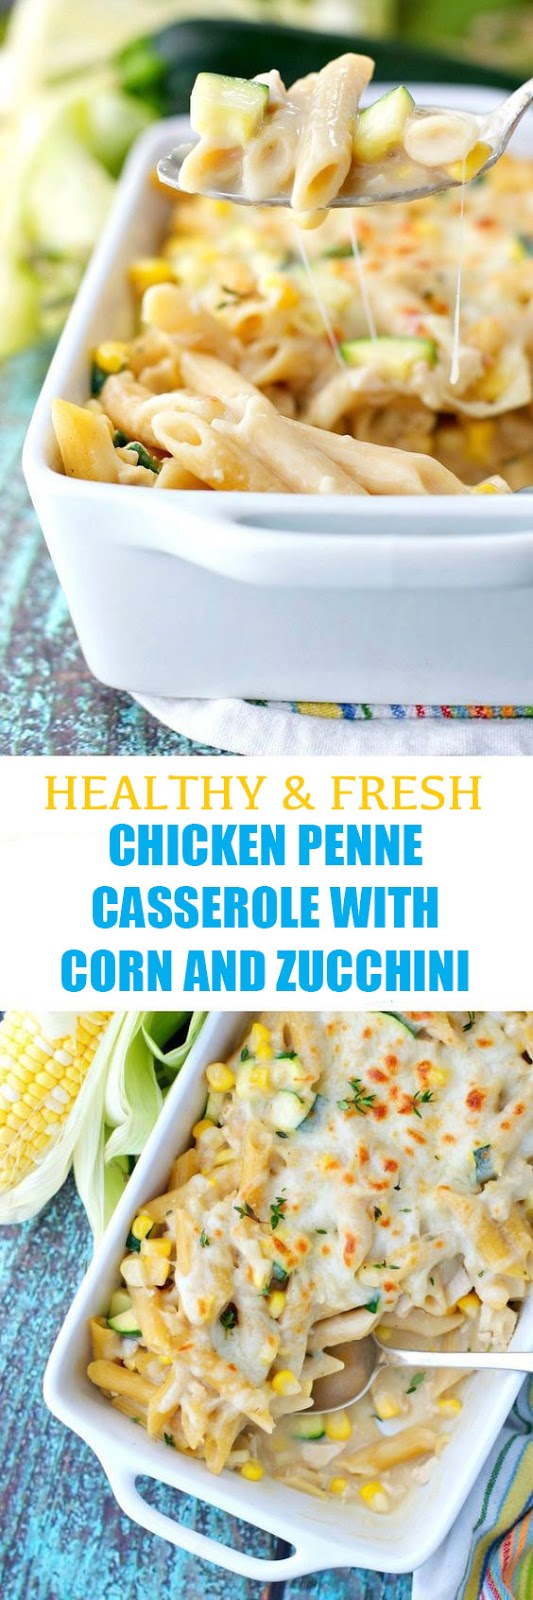 Healthy & Fresh Chicken Penne Casserole with Corn and Zucchini